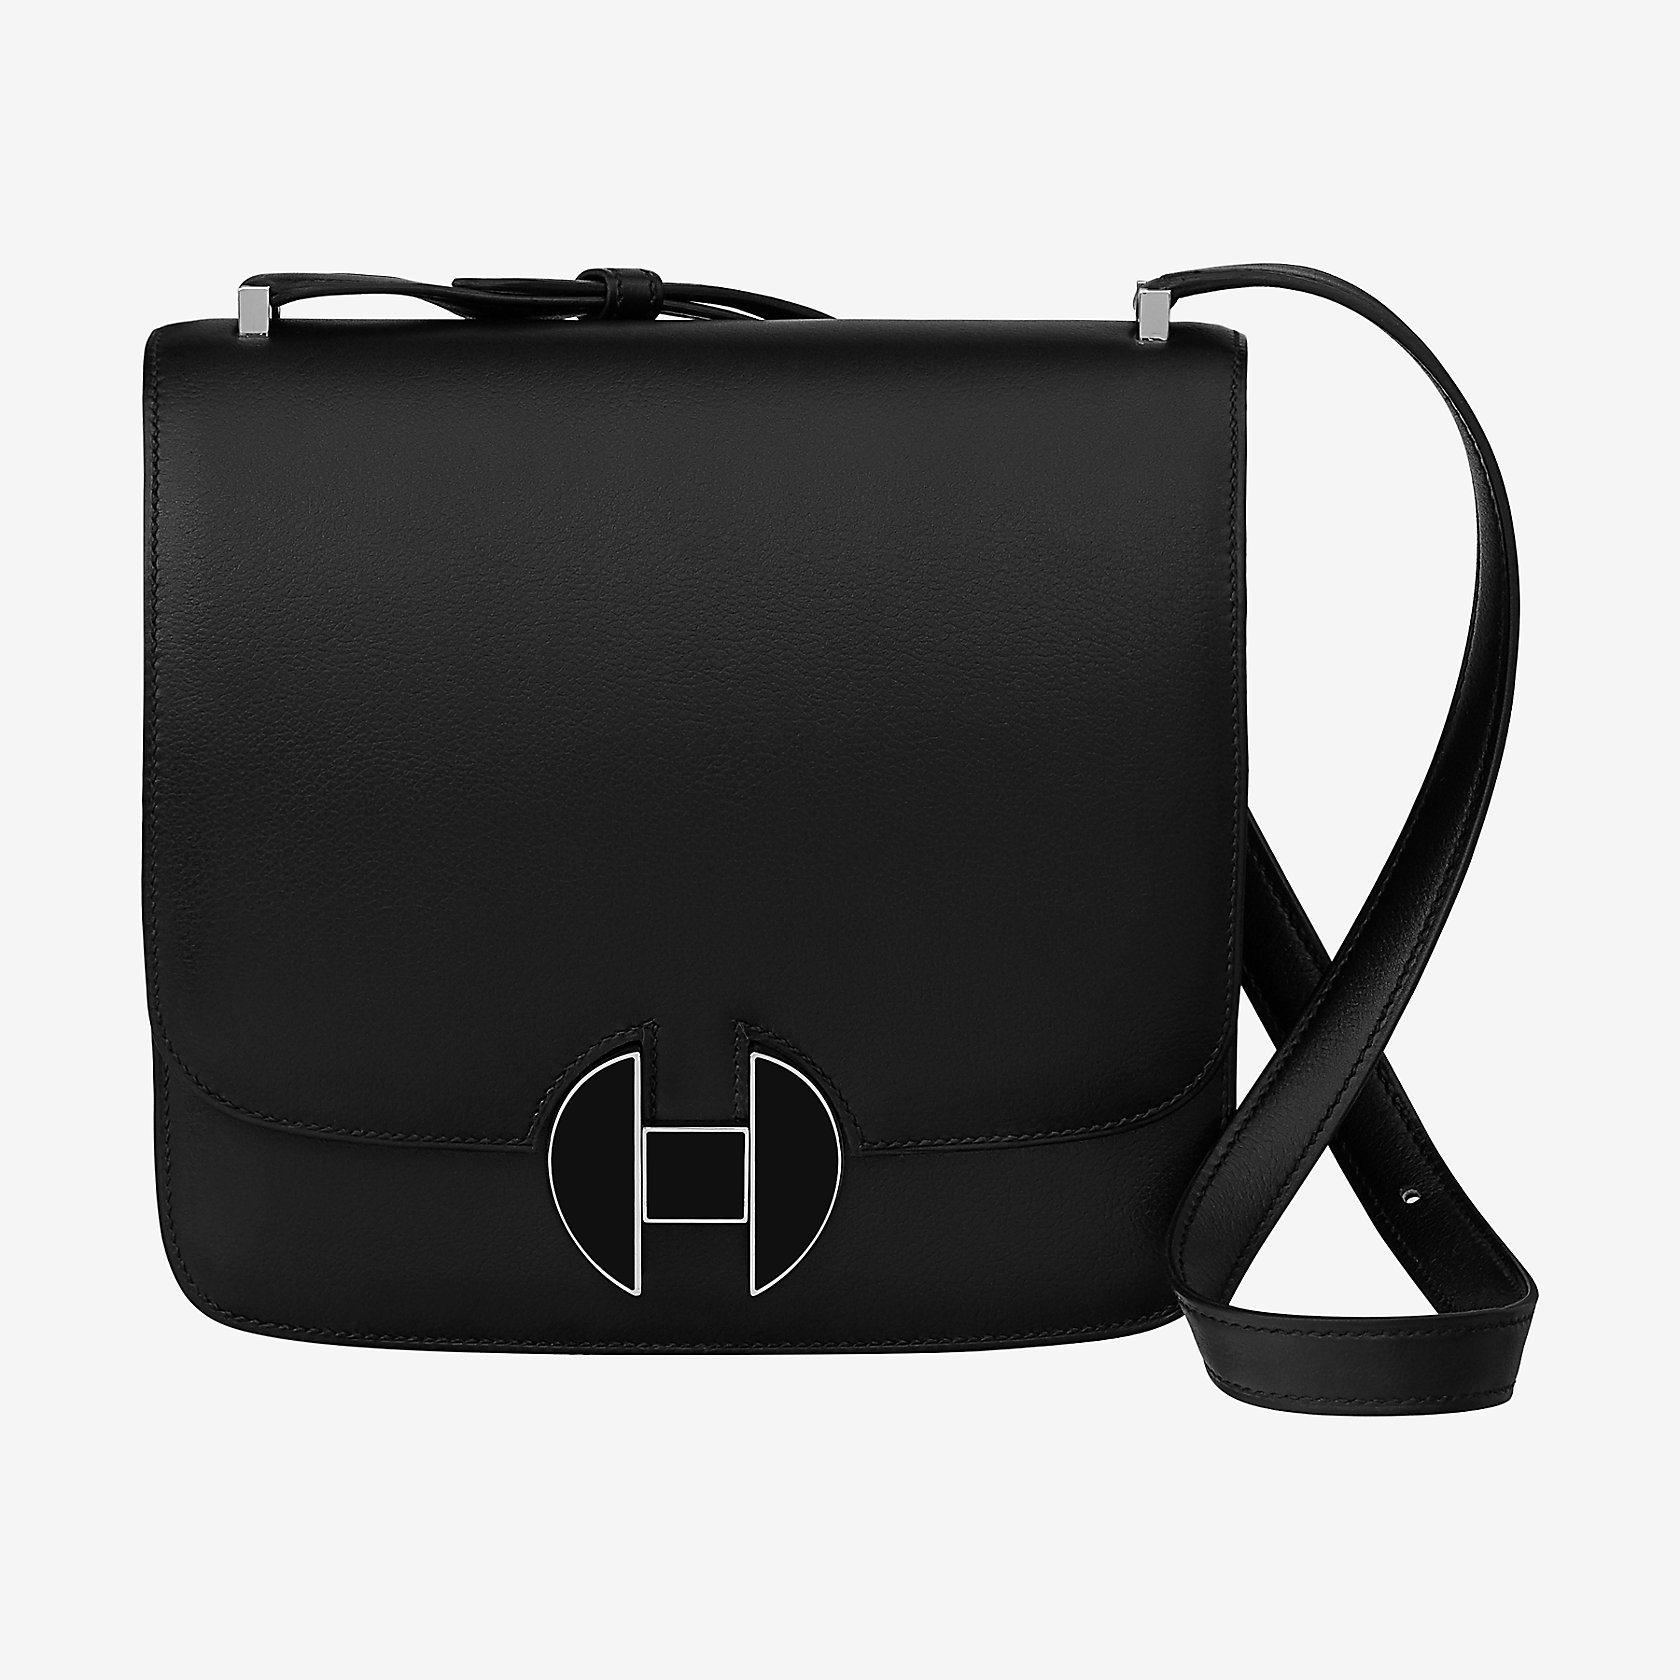 What Are Hermes Bags | IQS Executive